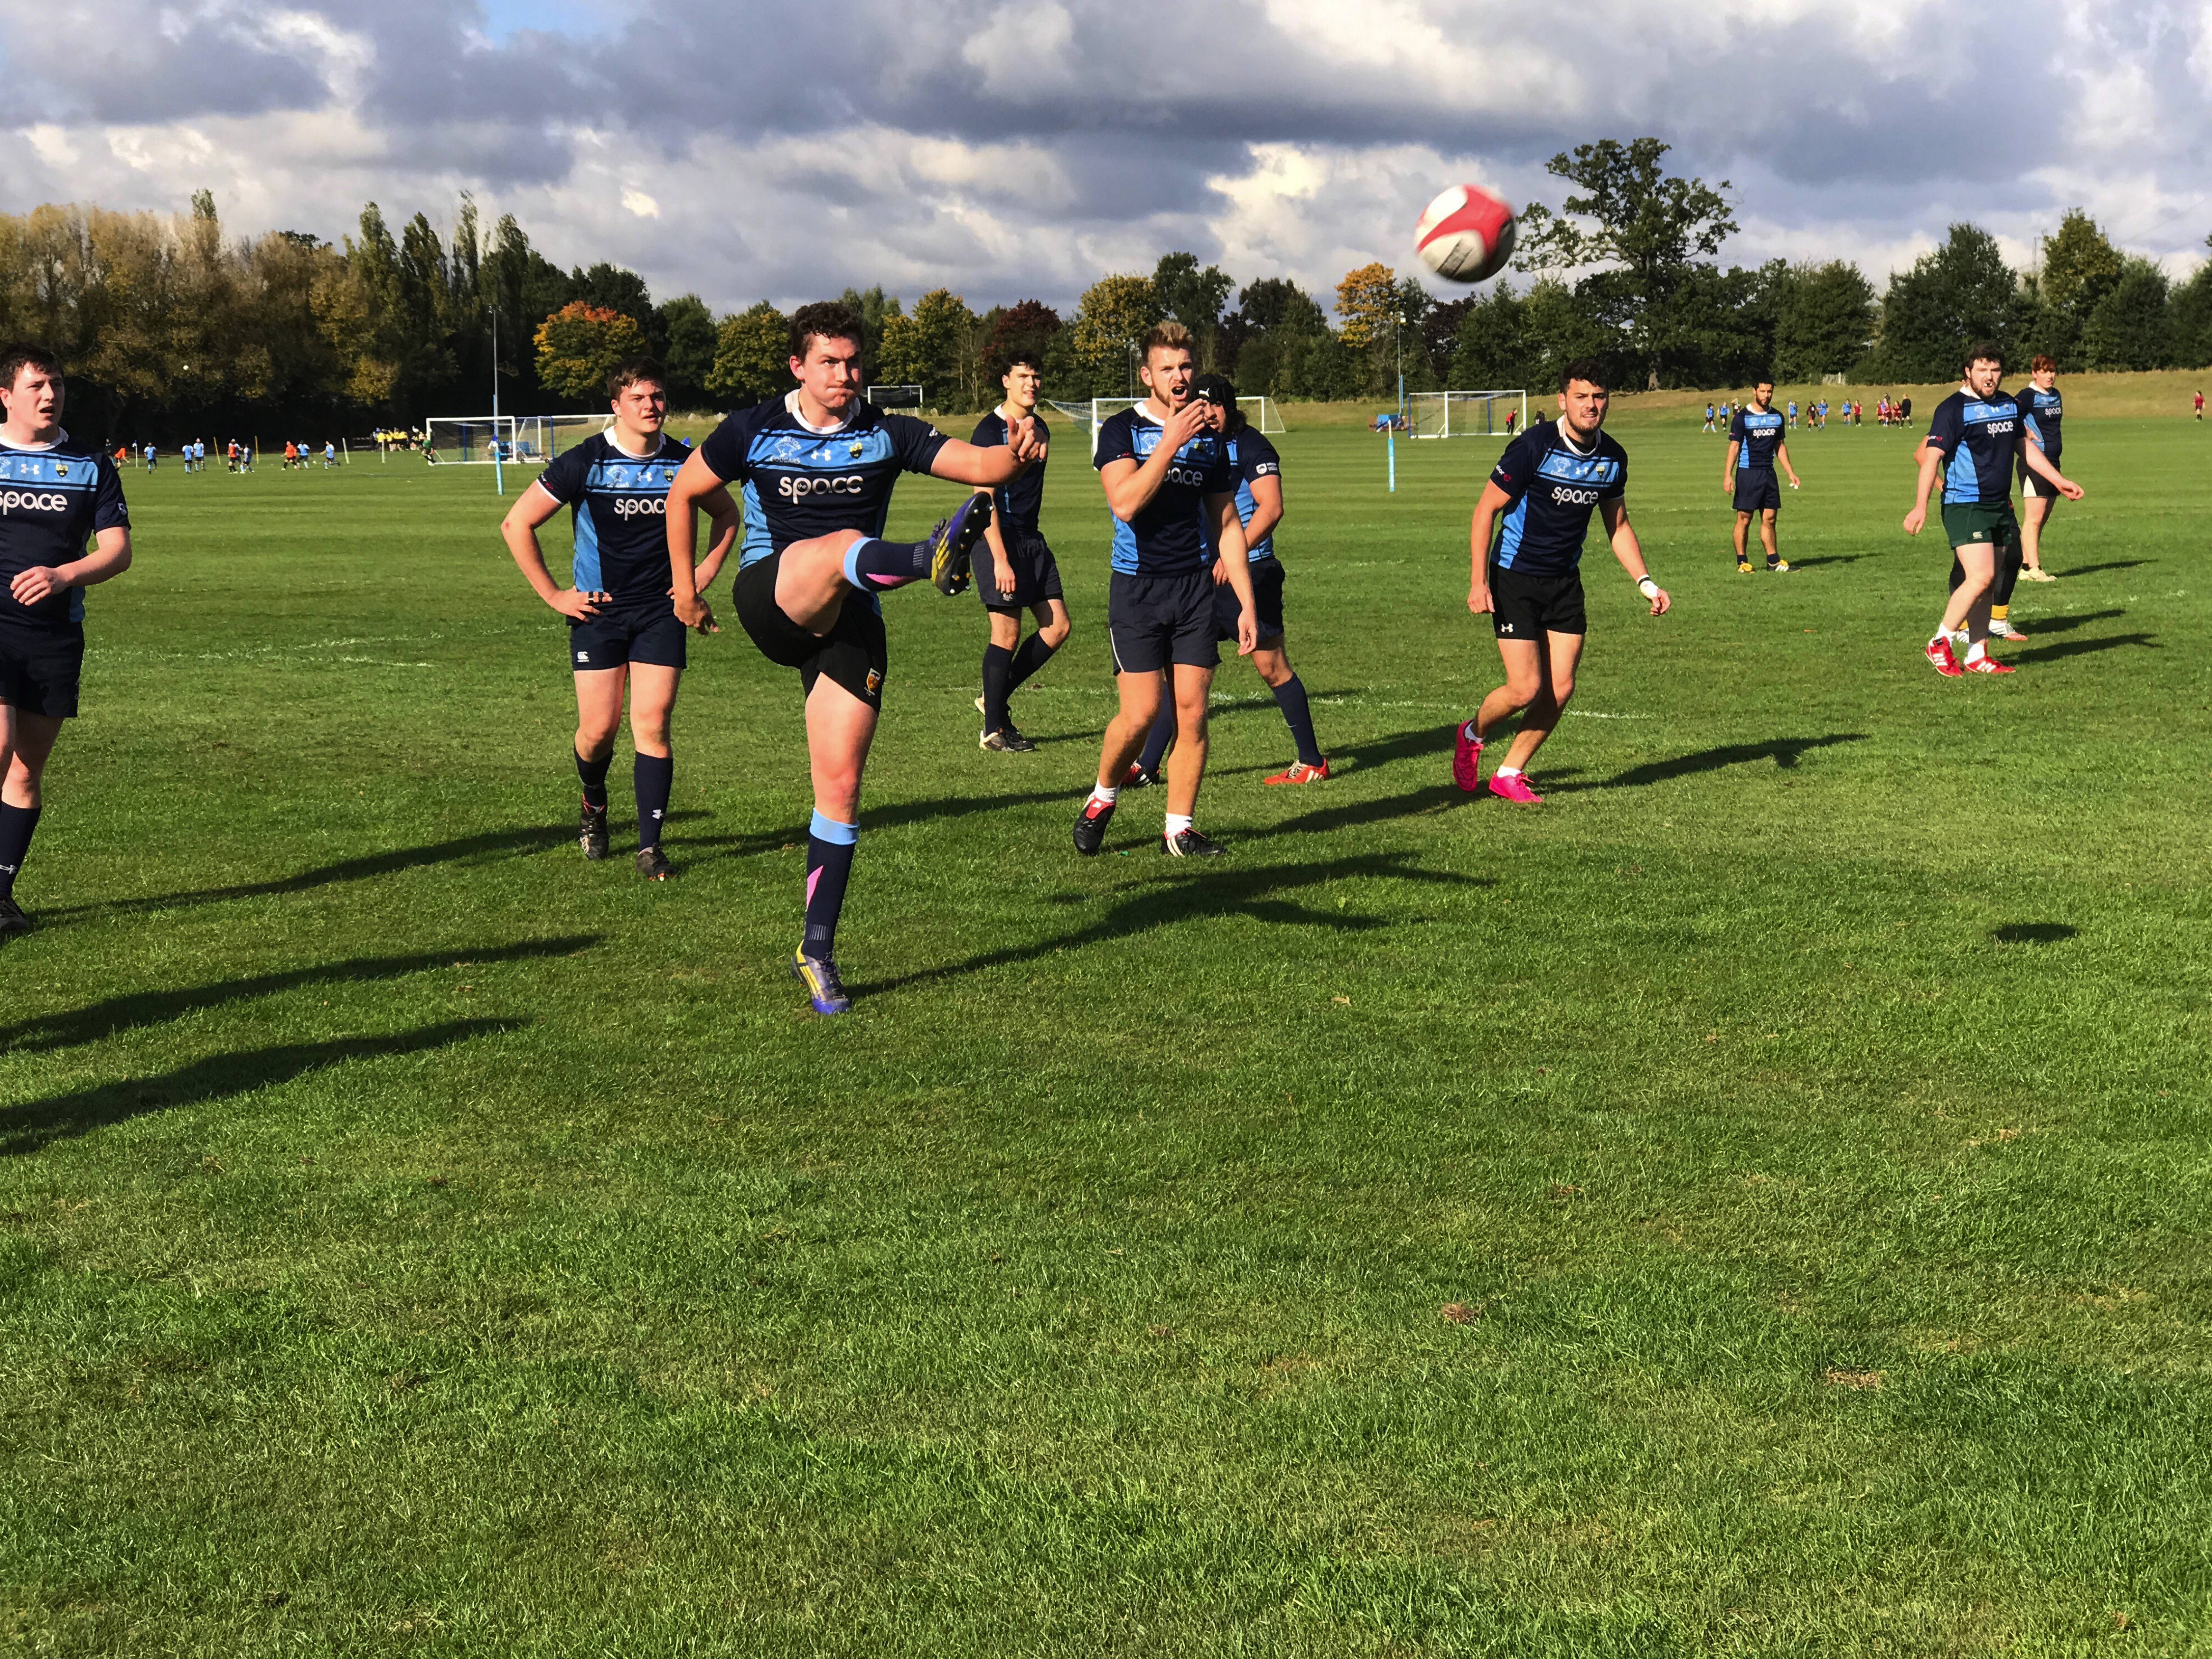 Kingston University sports round up: football, rugby union, lacrosse, badminton, hockey, tennis, squash, netball and volleyball